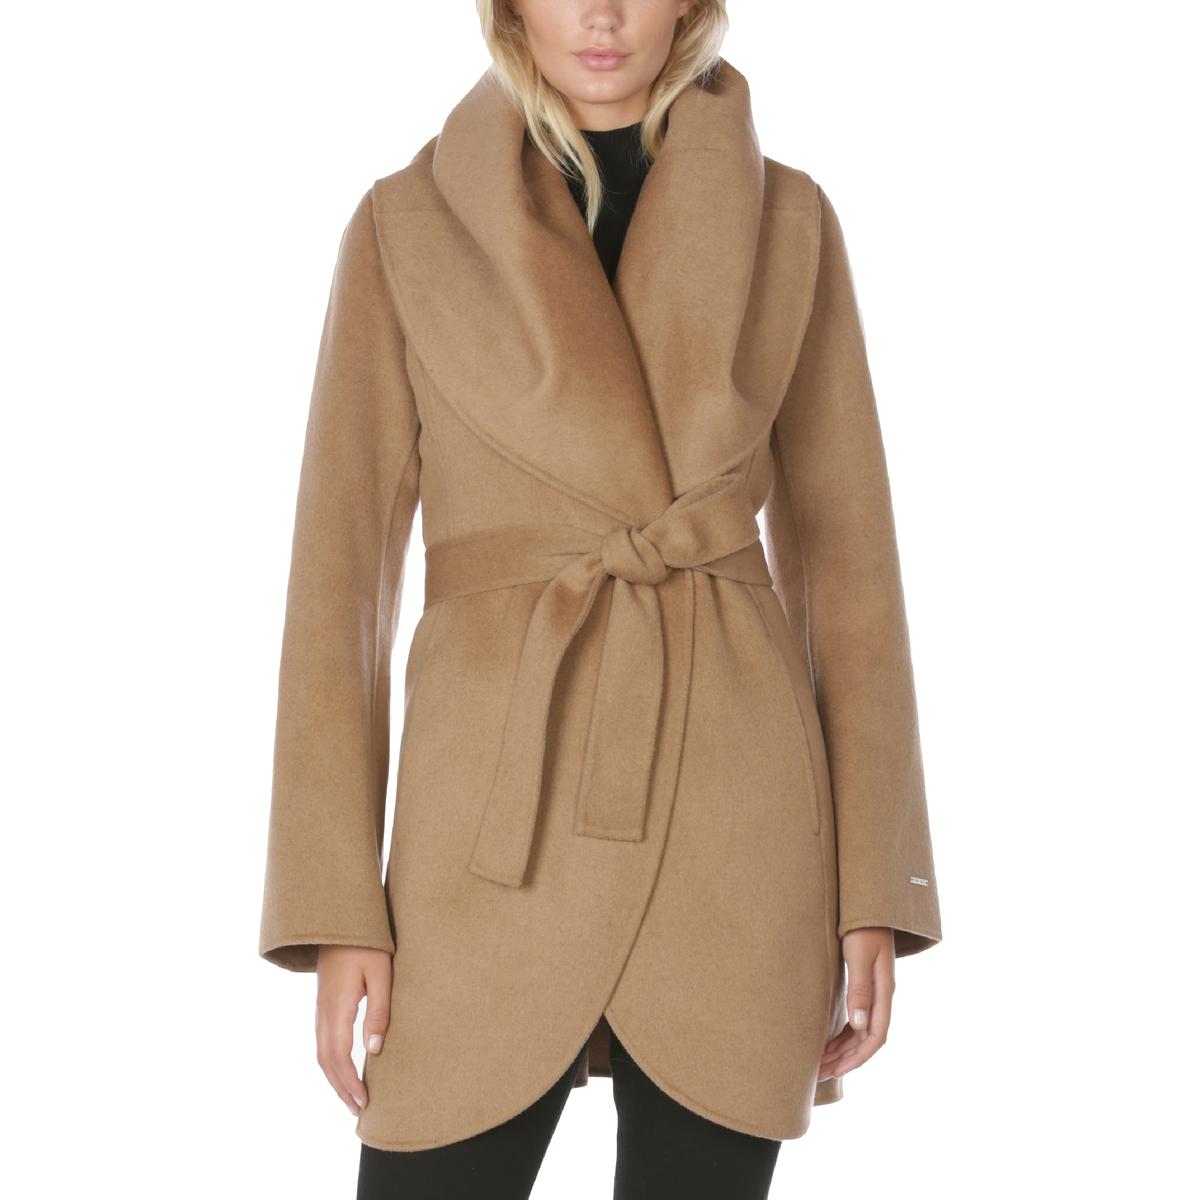 TAHARI Women's Double Face Wool Blend Wrap Coat with Oversized Collar ...